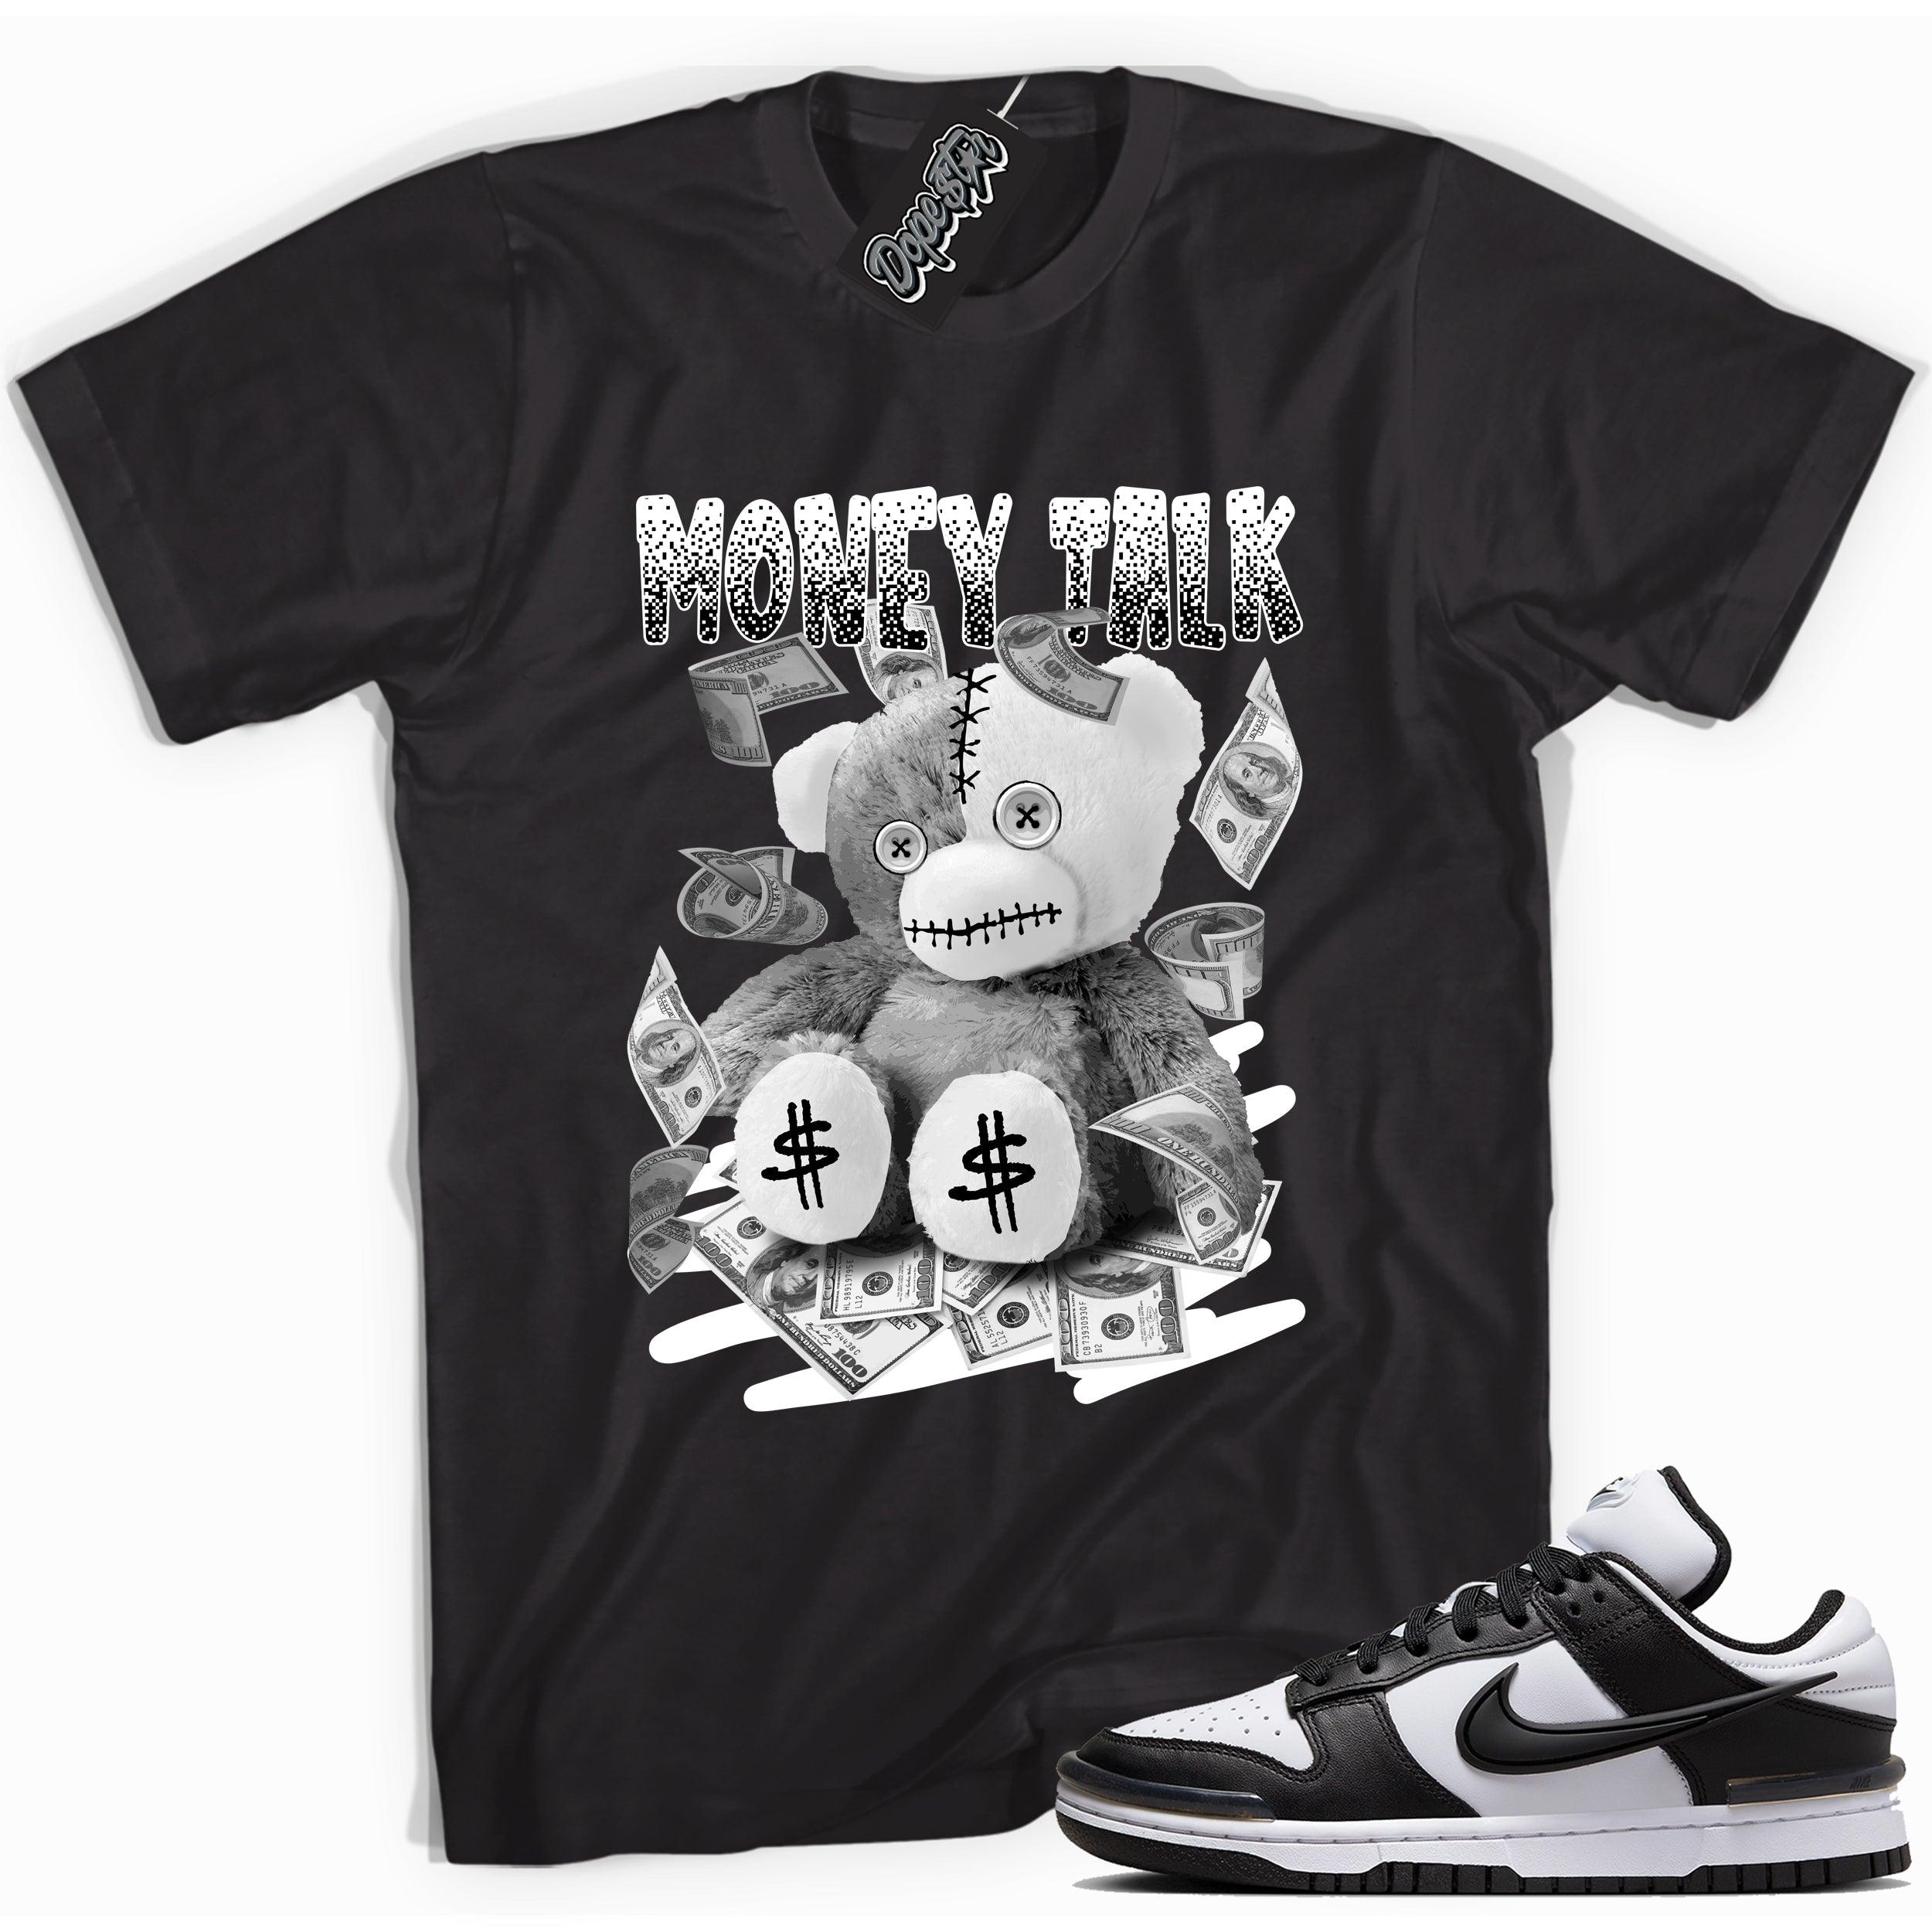 Cool black graphic tee with 'money talk bear' print, that perfectly matches Nike Dunk Low Twist Panda sneakers.